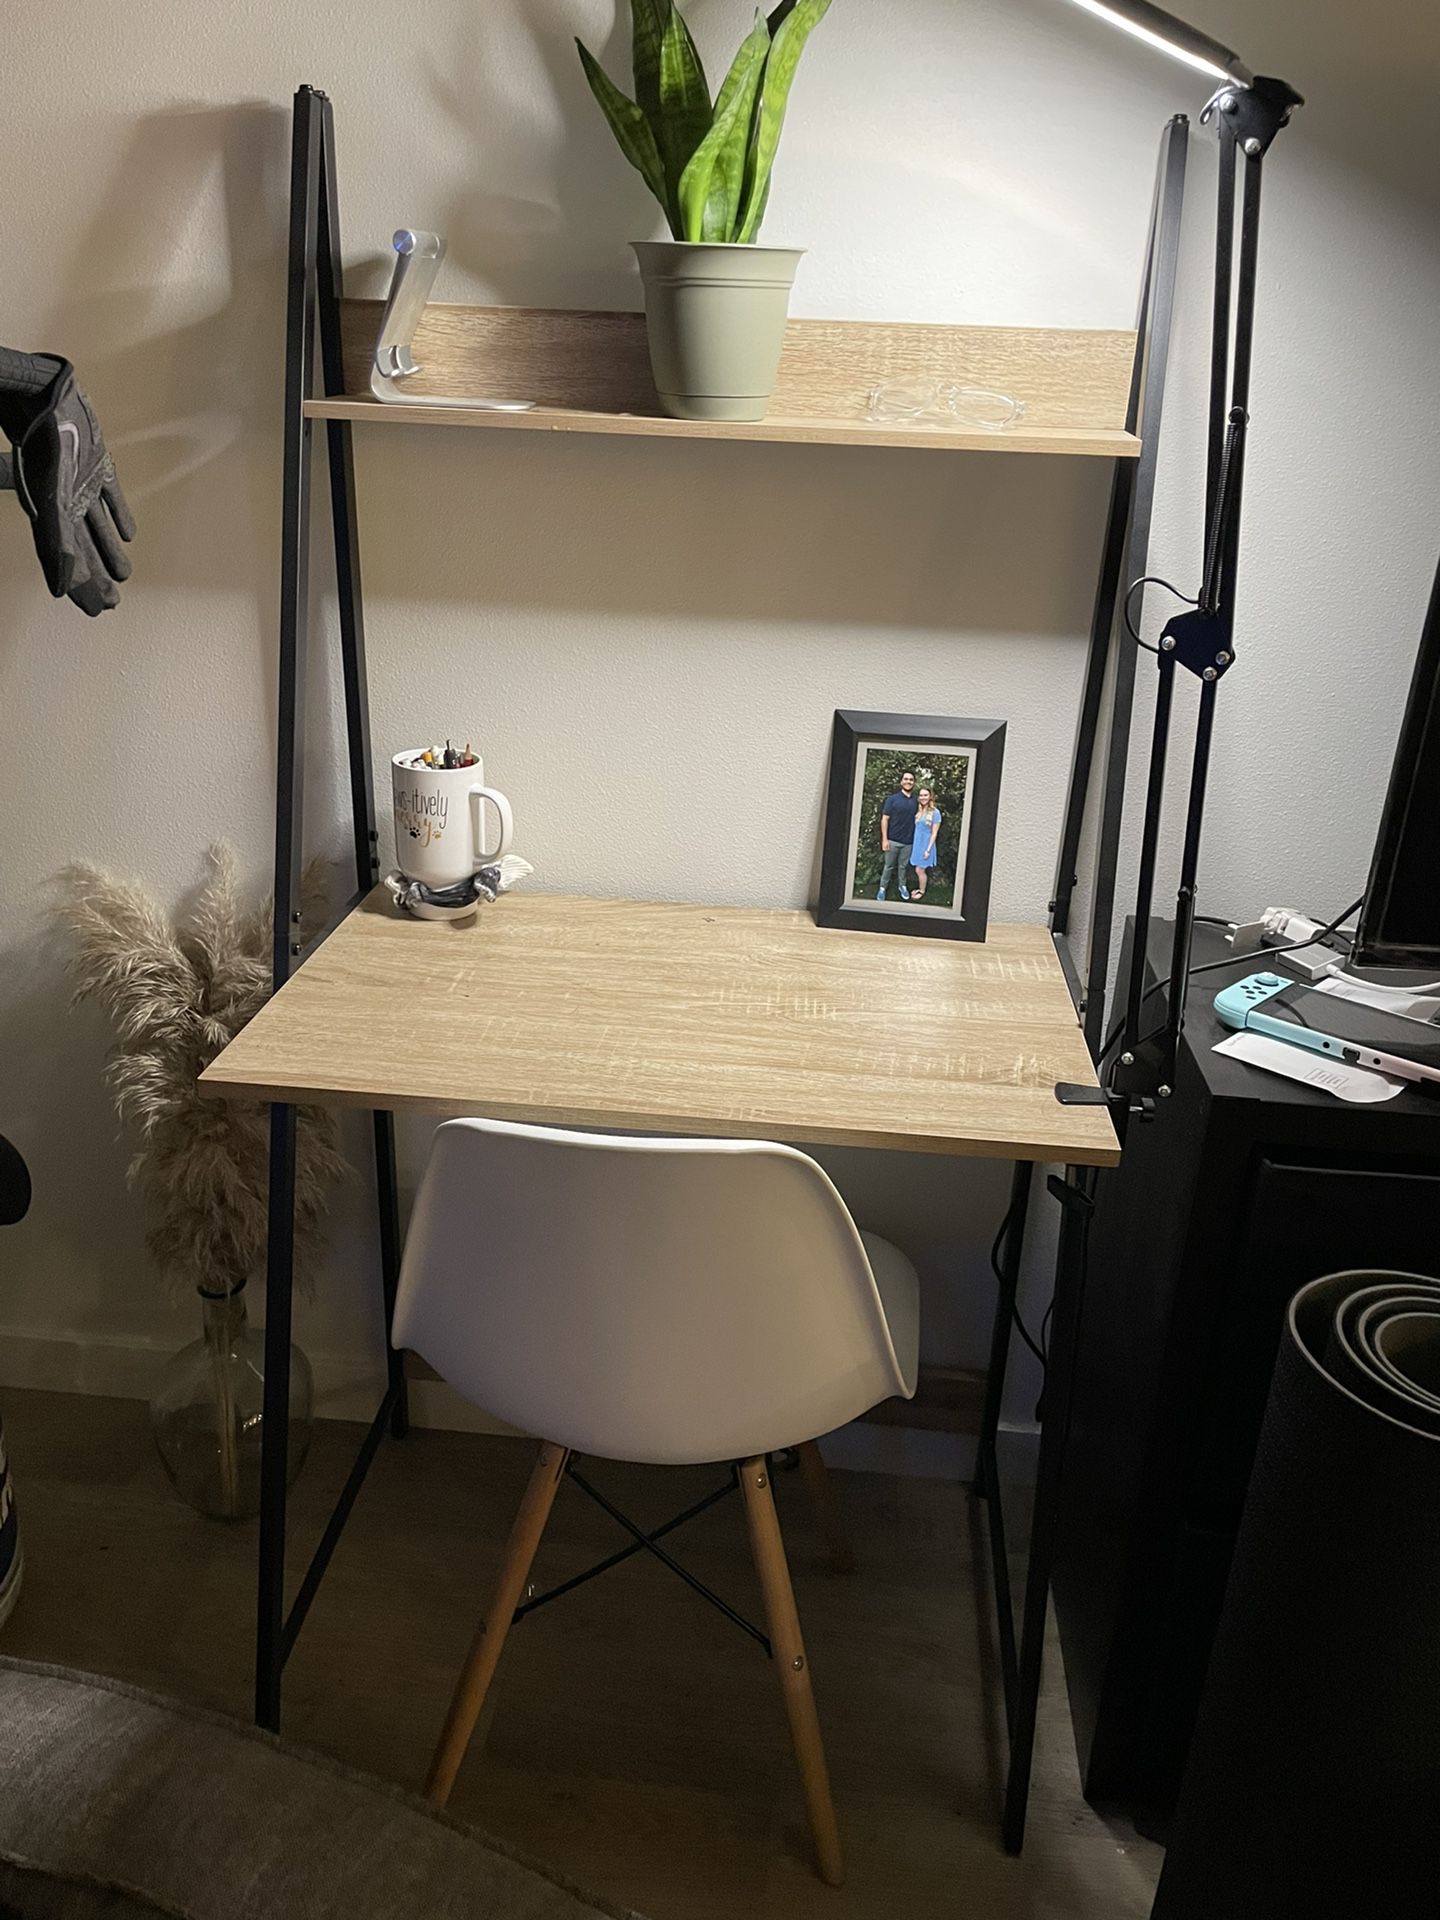 Ladder Desk With Chair